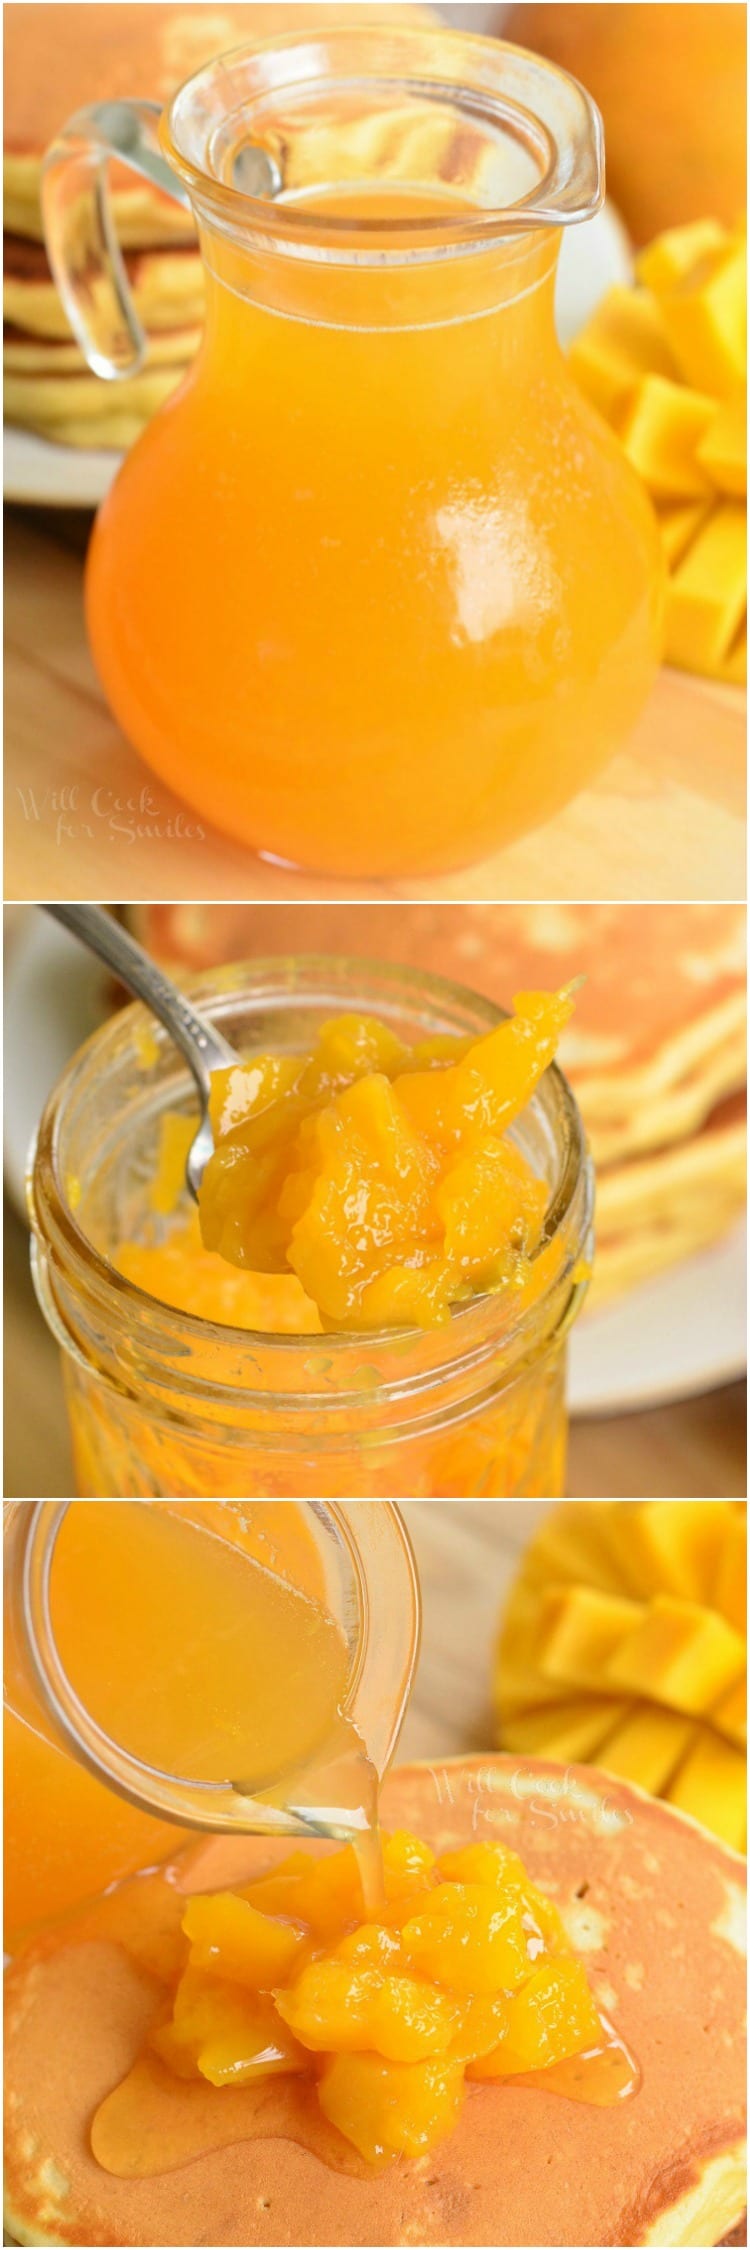 Mango Syrup in a glass jar, mango jam in a jar, last photo pouring mango over pancakes 